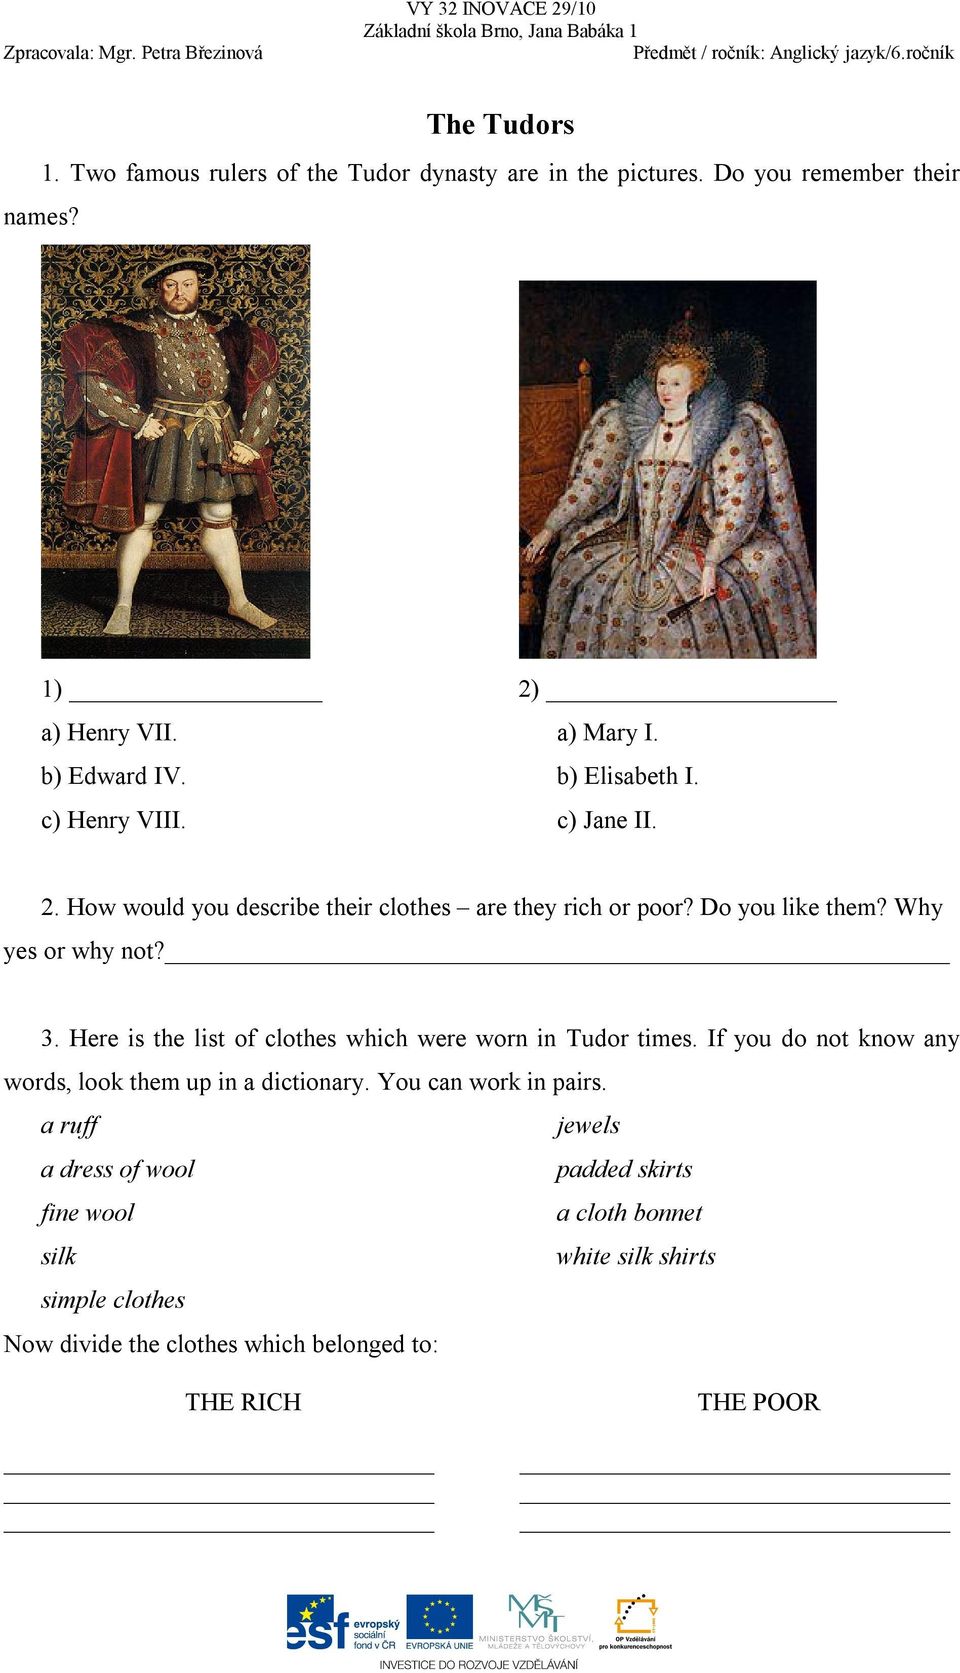 Here is the list of clothes which were worn in Tudor times. If you do not know any words, look them up in a dictionary. You can work in pairs.